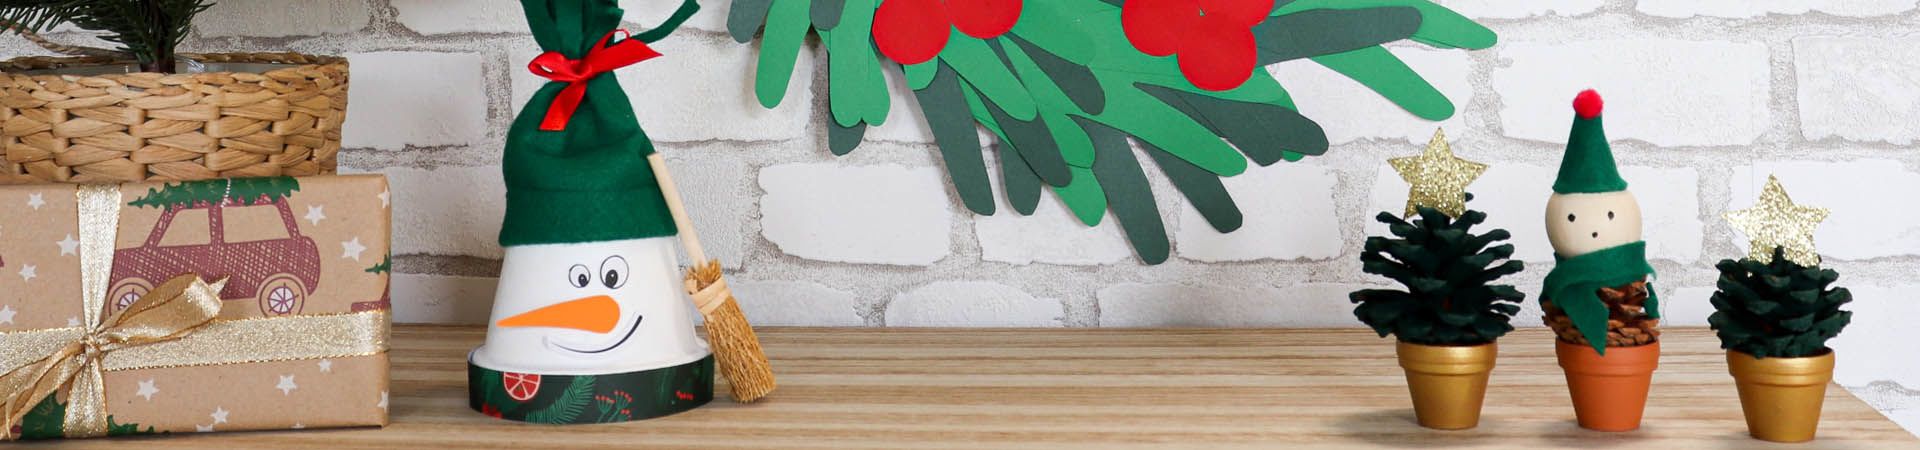 DIY Christmas craft ideas for both young and old.